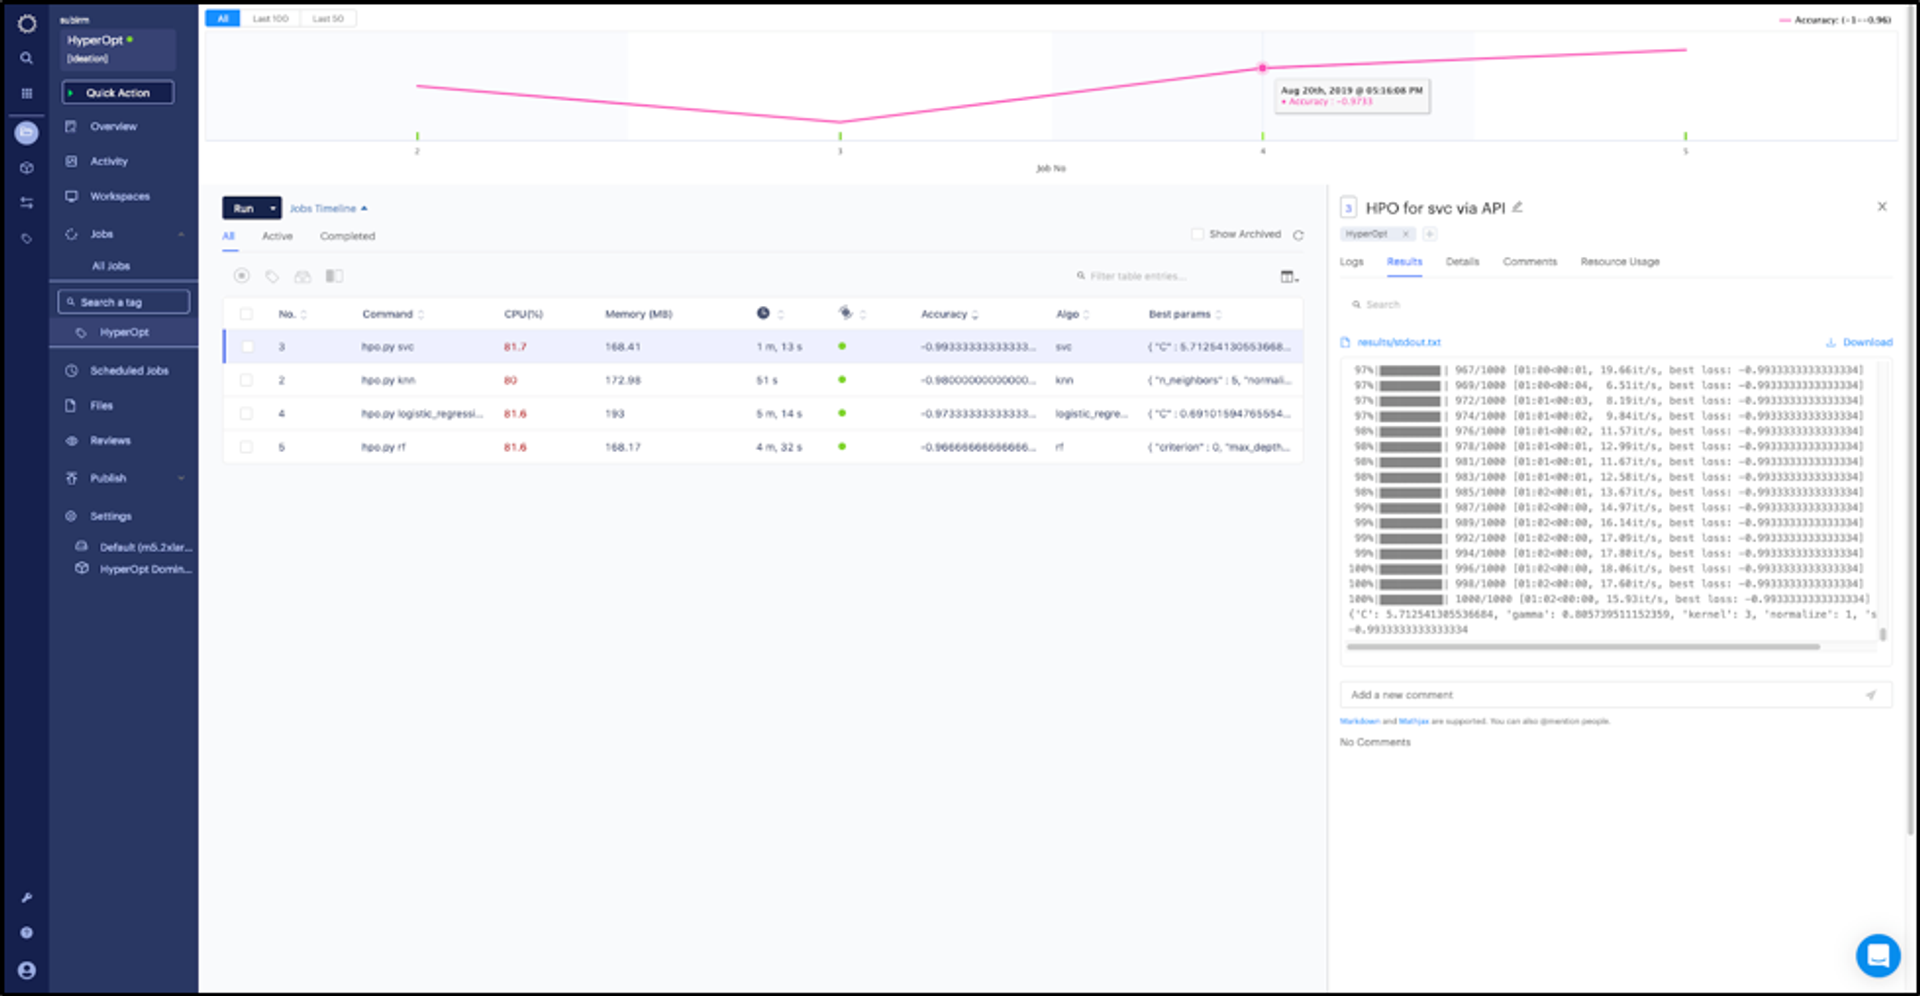 Jobs dashboard with results of the different hyperparameter optimization runs